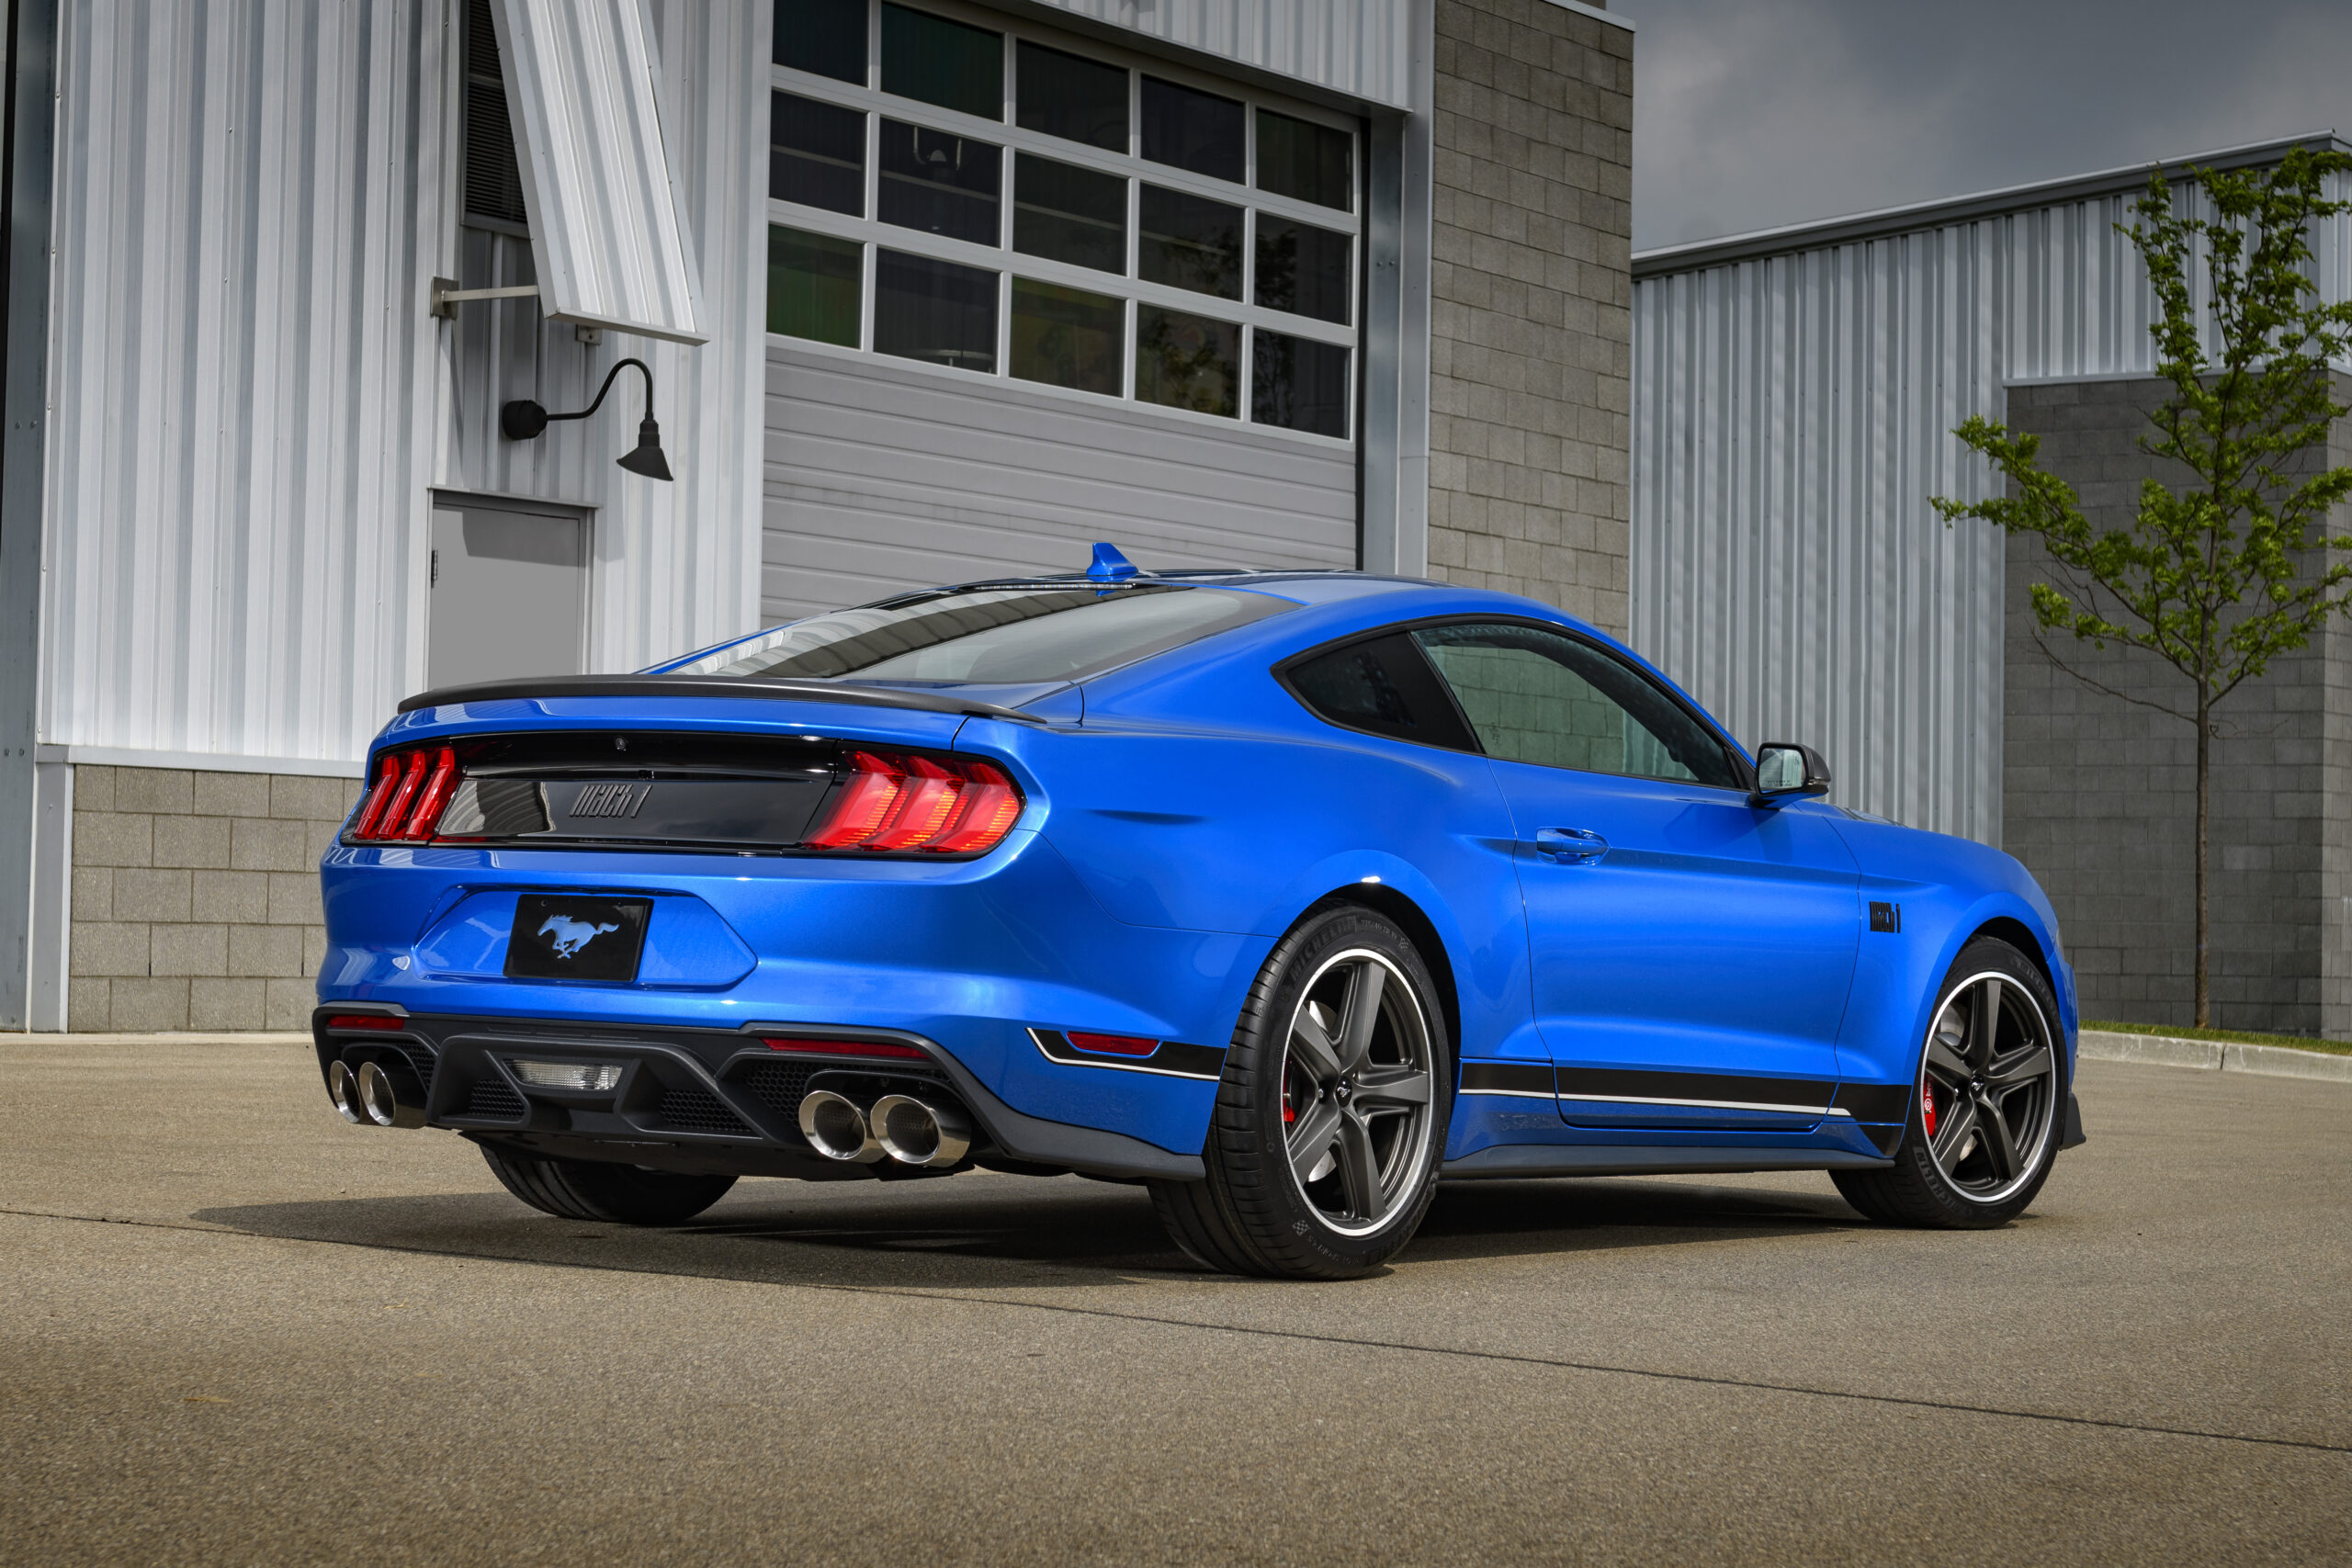 Mach 1 Mustang Adopts GT350 Tremec, Available Spring 2021